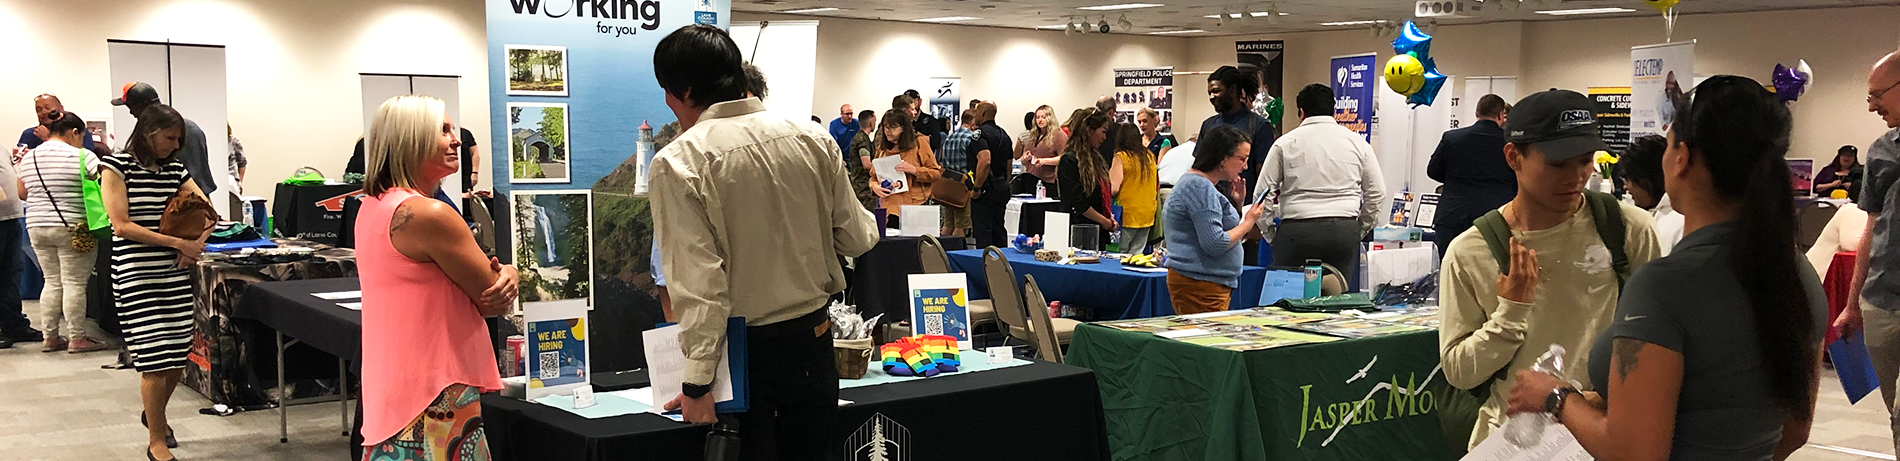 employers and prospective employees at a job fair